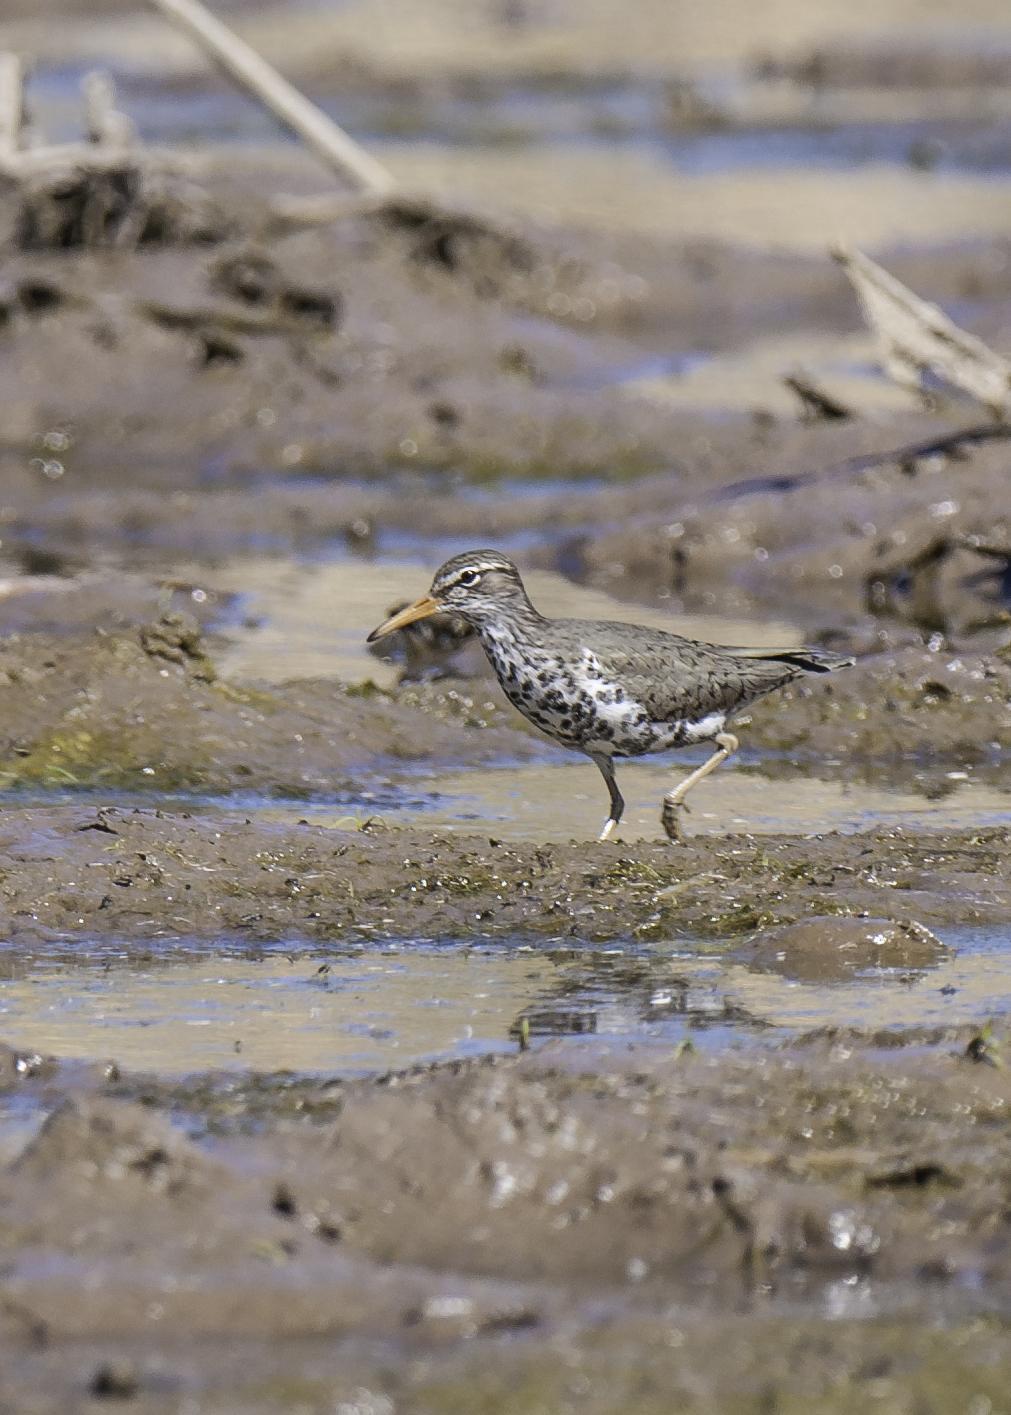 Spotted Sandpiper Photo by Mason Rose